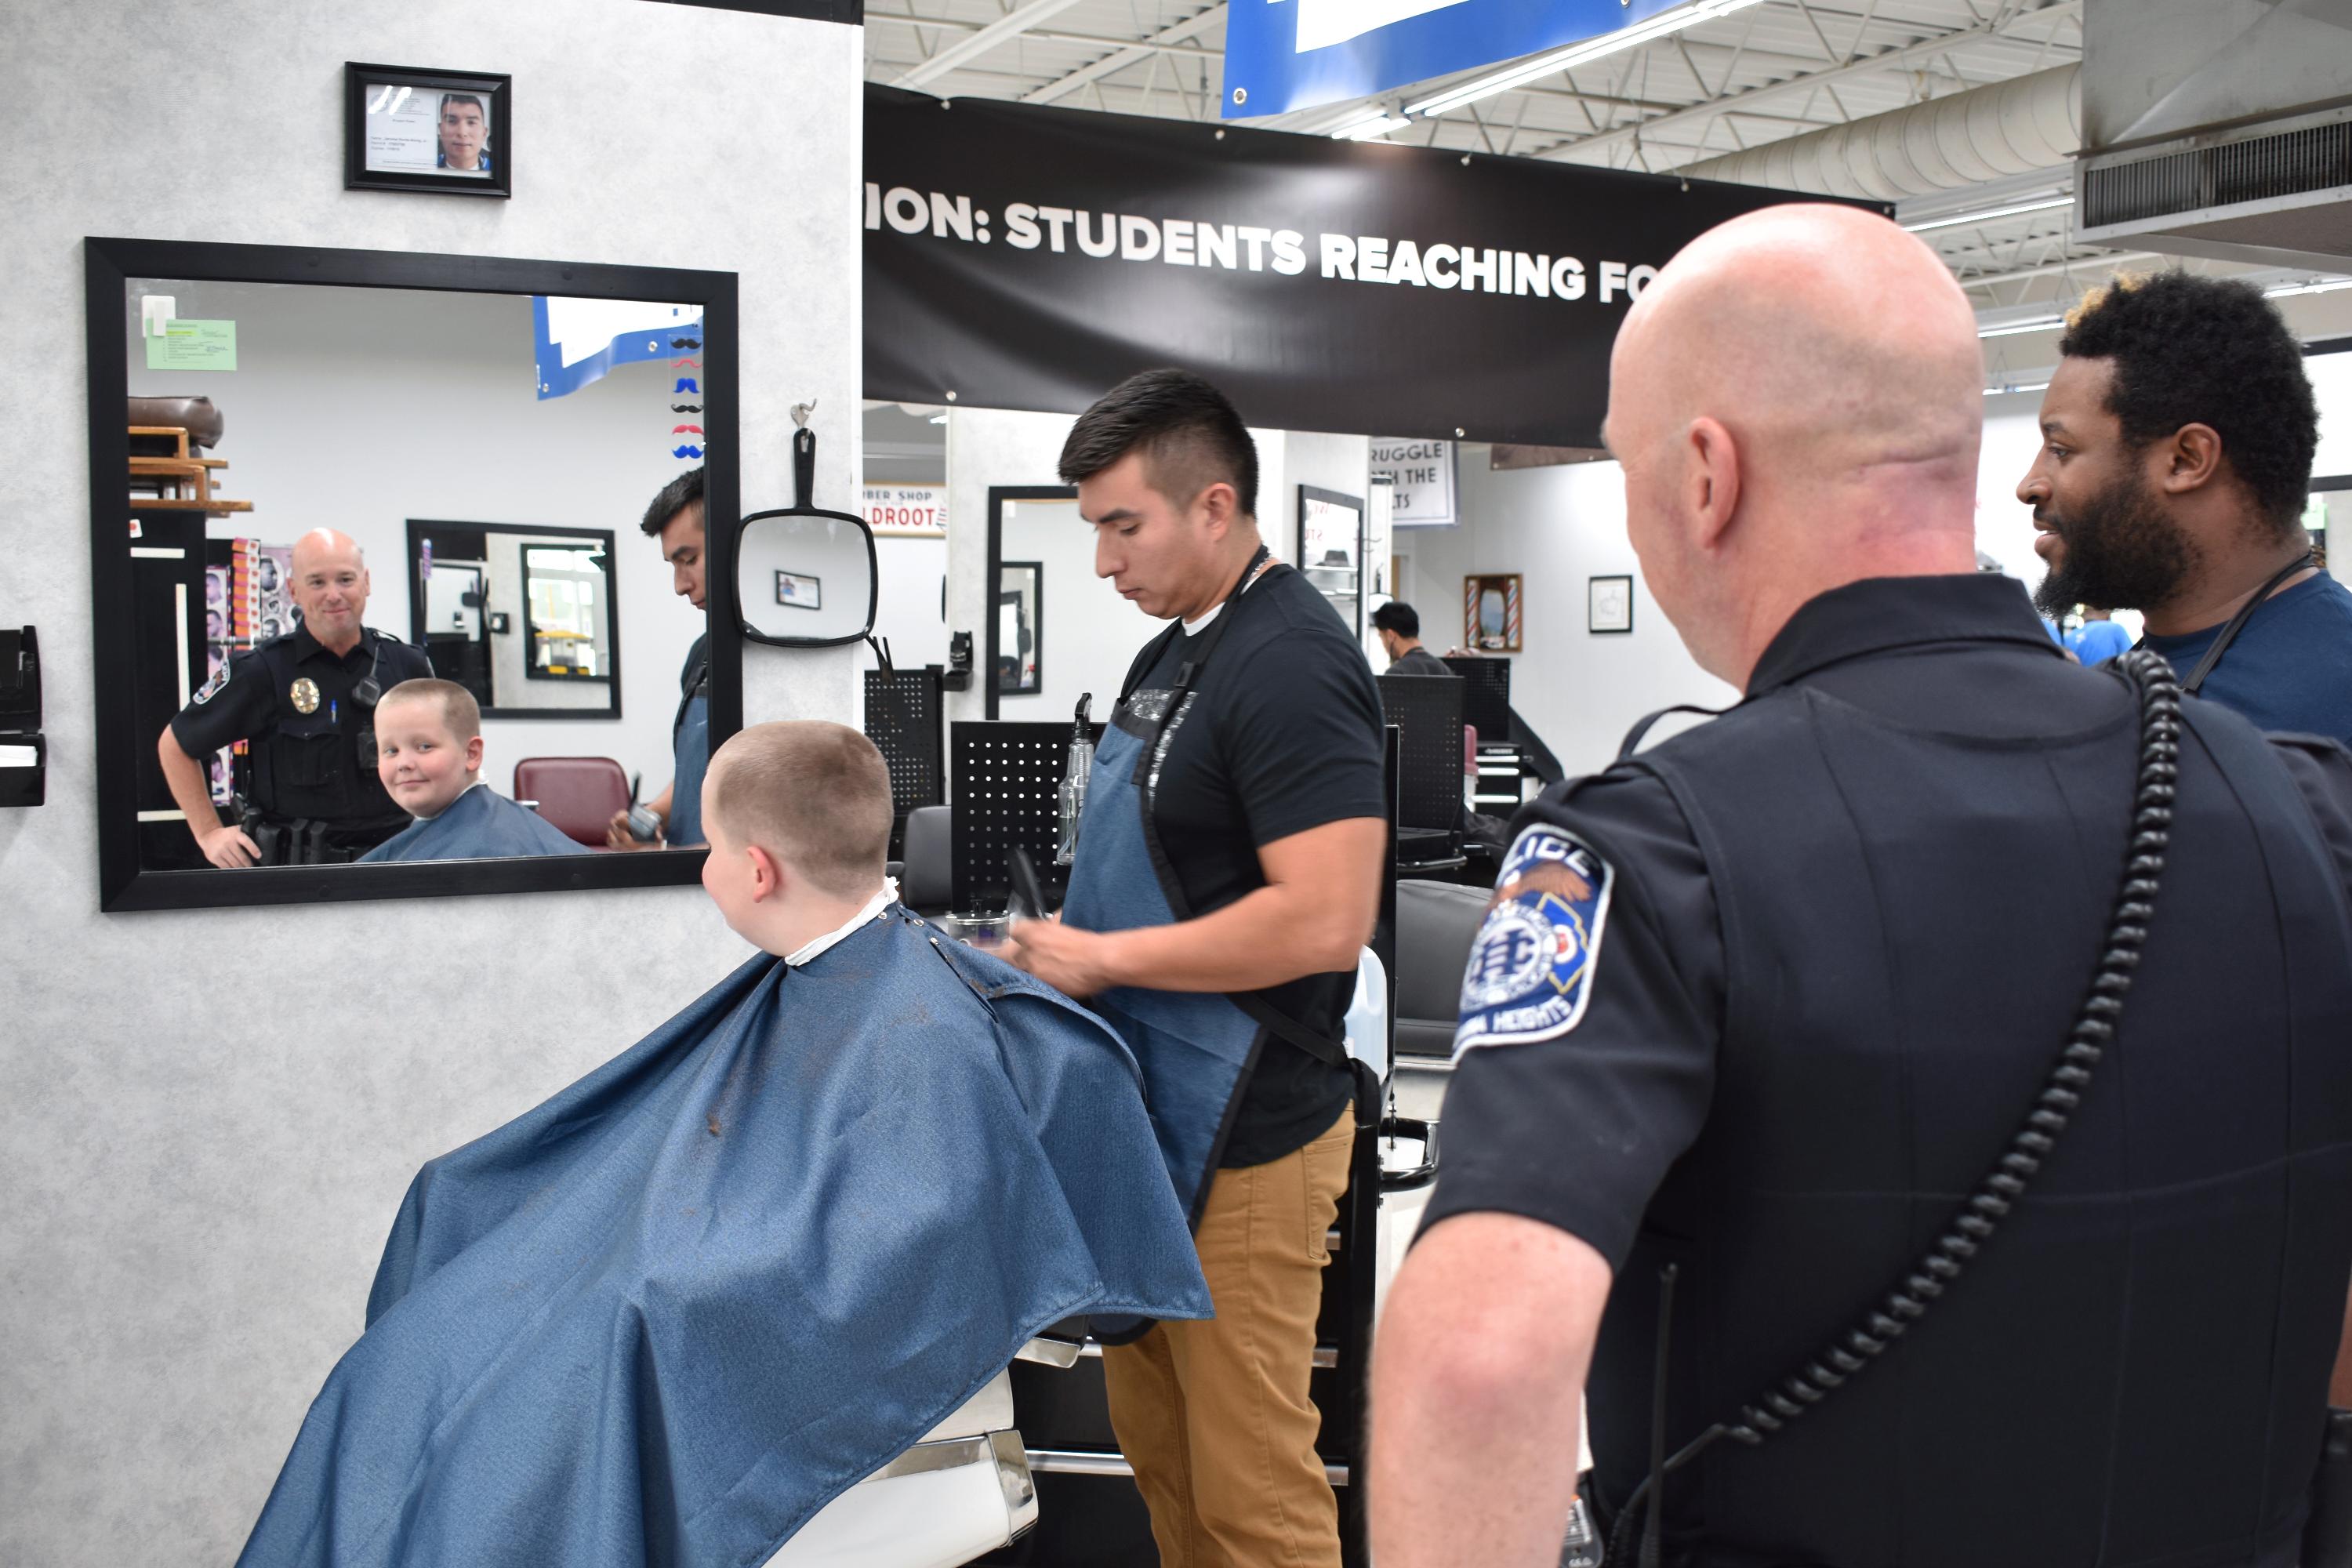 Cuts with a Cop with Jr. Kretzmann (5th grader)